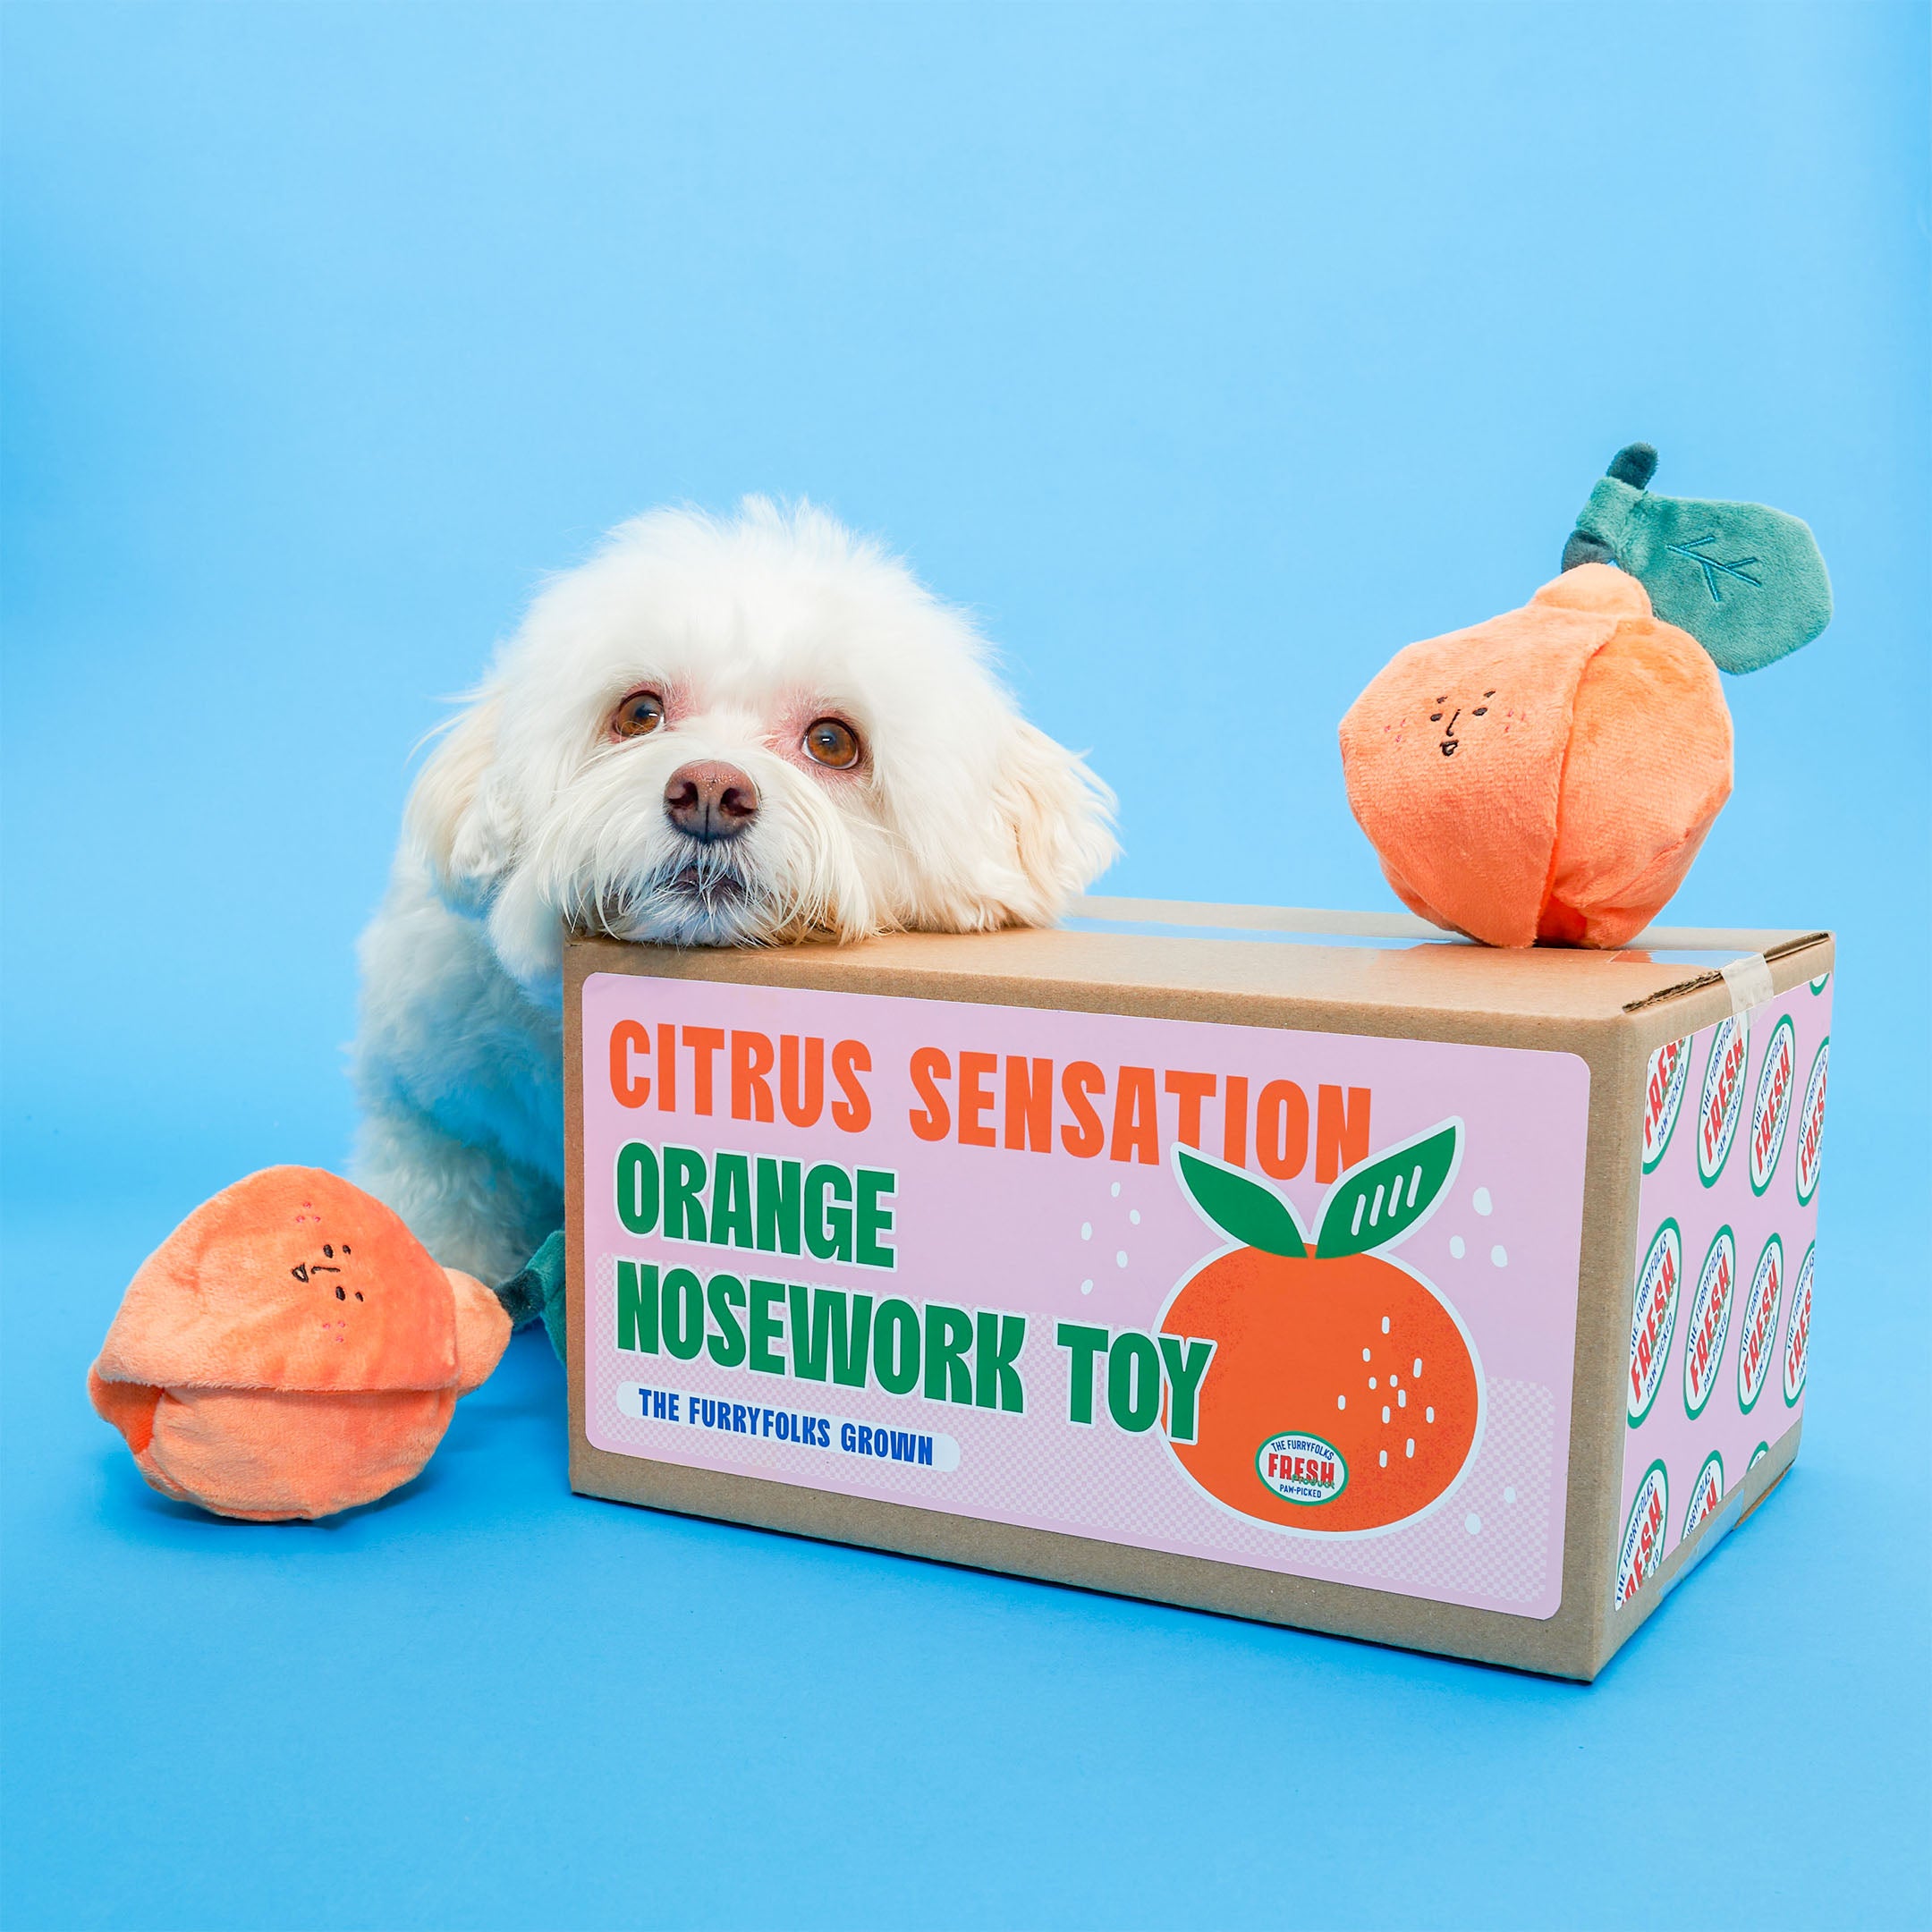 A fluffy white dog is peeking over a cardboard box on a blue background, next to an orange-shaped dog toy with a teal stem. The box is labeled "Citrus Sensation Orange Nosework Toy by The Furryfolks Grown".